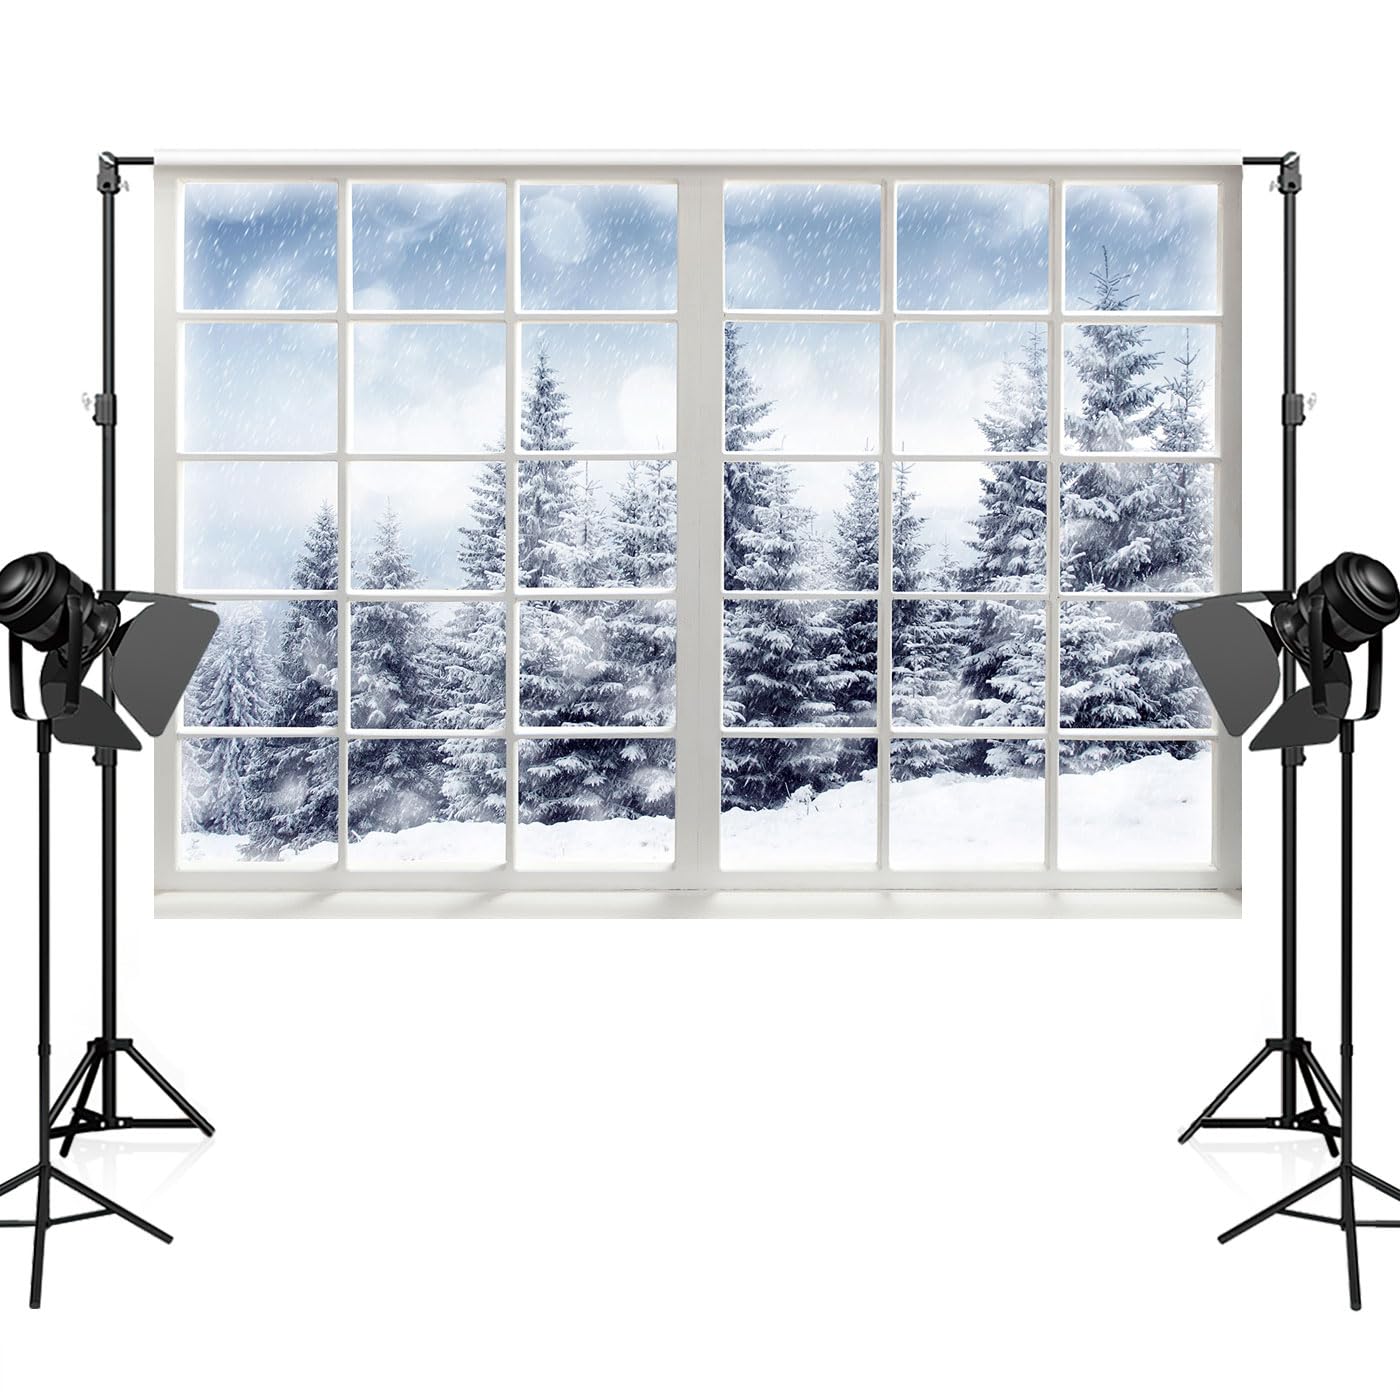 7x5ft Winter Wonderland Forest Scene Backdrop for Photography Christmas Party Decoration